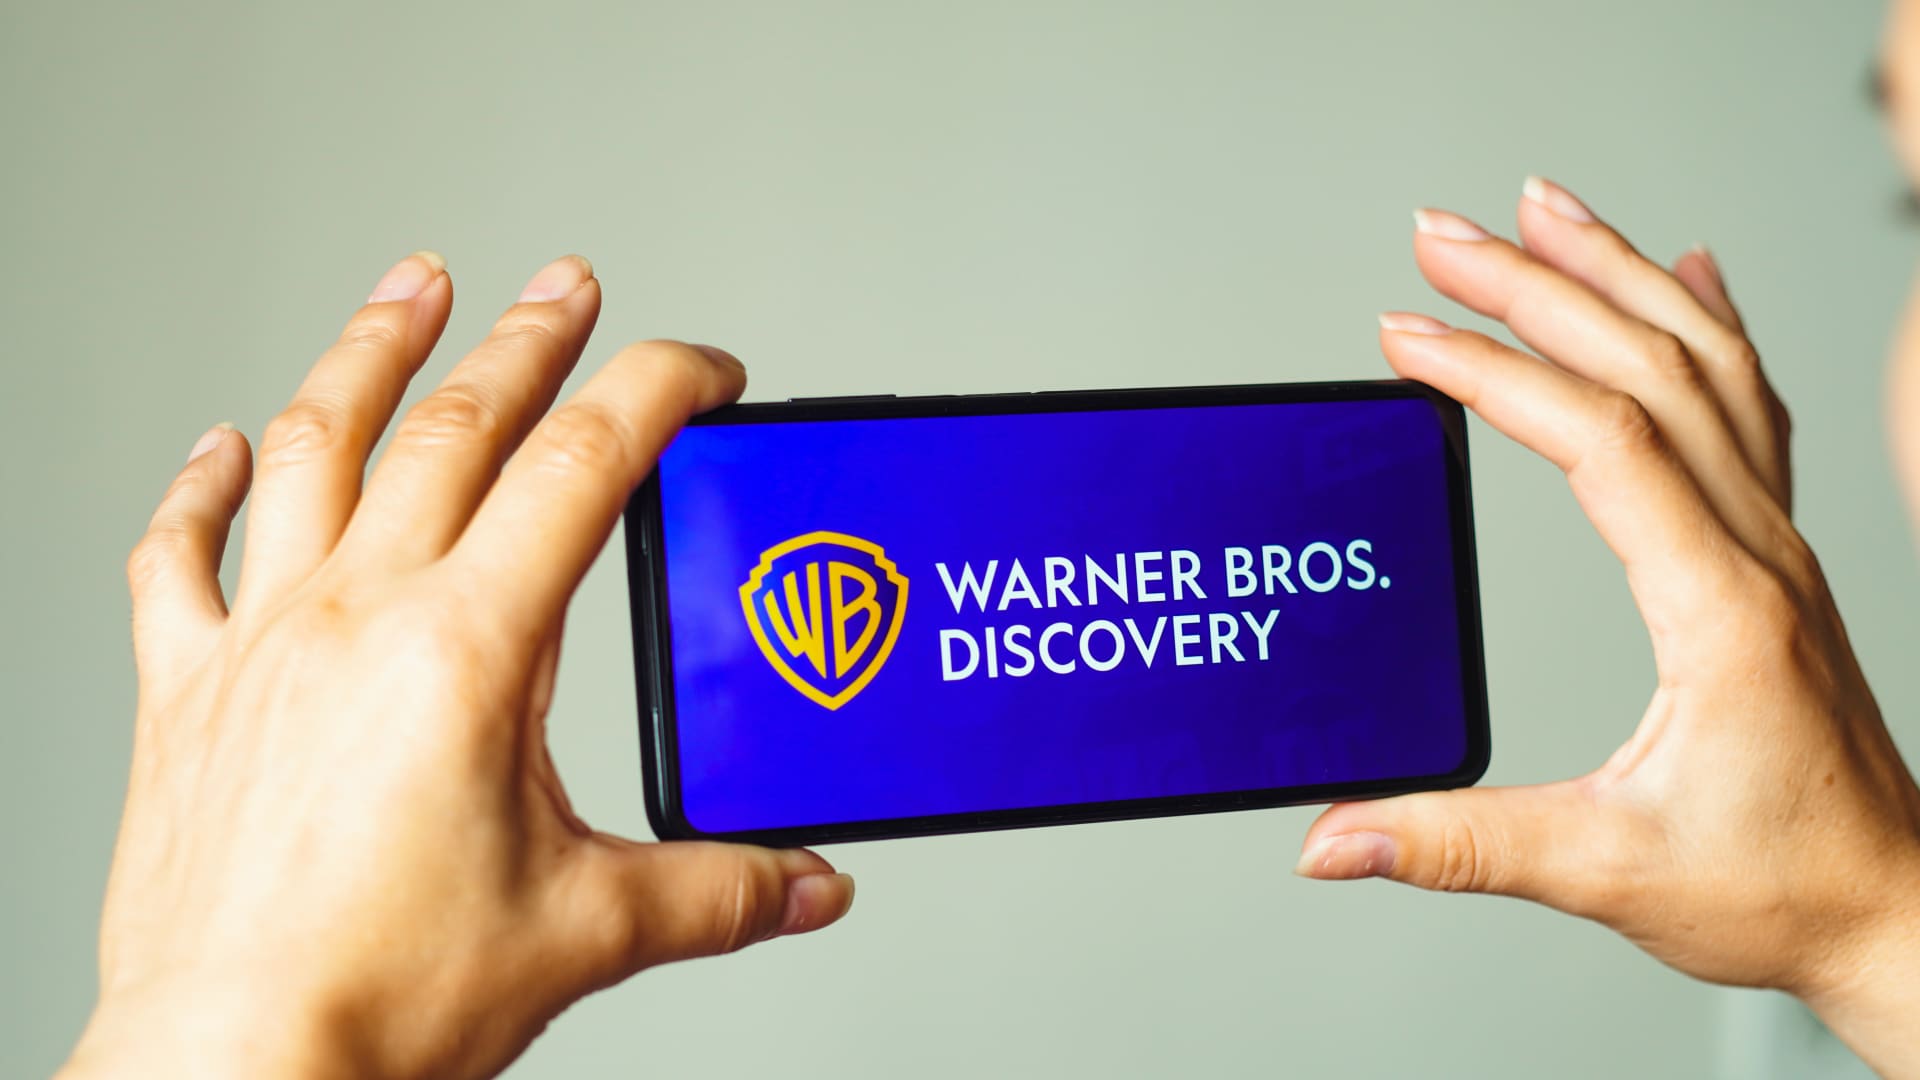 Warner Bros. Discovery WBD Q3 earnings